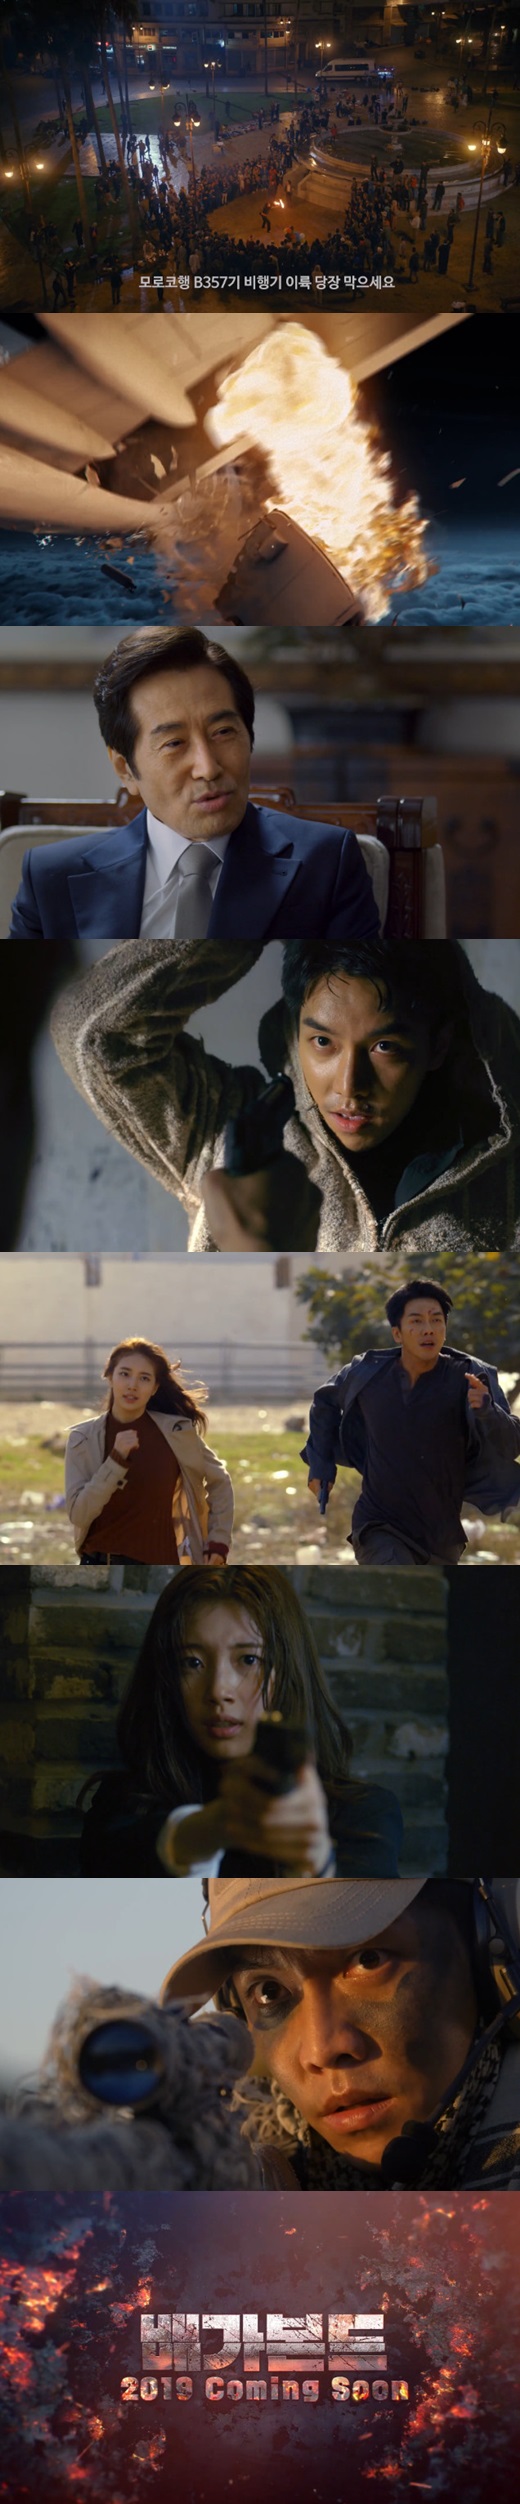 <p>31 SBS new drama Vagabond(pole device, young-Cheol Kyung Yi distribution type recognition)of the 1st Teaser trailer released, netizens have their hot interest.</p><p>Portal to the Vagabond1st Teaser is approximately 1 minute, heres a short video with a veil, behind which was a Vagabondin the book was a bit loose. Especially gorgeous scale and Lee Seung-gis roar, Bae Suzys appearance, briefly appeared to expect.</p><p>video on sudden the plane landed to stop that Lee Seung-gi side and a something secret and Eun look. Or Bae Suzy the plane crashed as 211 people died,he says.</p><p>Especially the video of him on Lee Seung-gi is they fuck someone? Why there is no guilt that people died? Why is my niece die!A wailing voice is heard.</p><p>Meanwhile the Vagabondis the airliner crashed in the accident involved a man concealed the truth found in the huge country to dig and the green drama. Come 5 November, the first of which will be broadcast.</p>